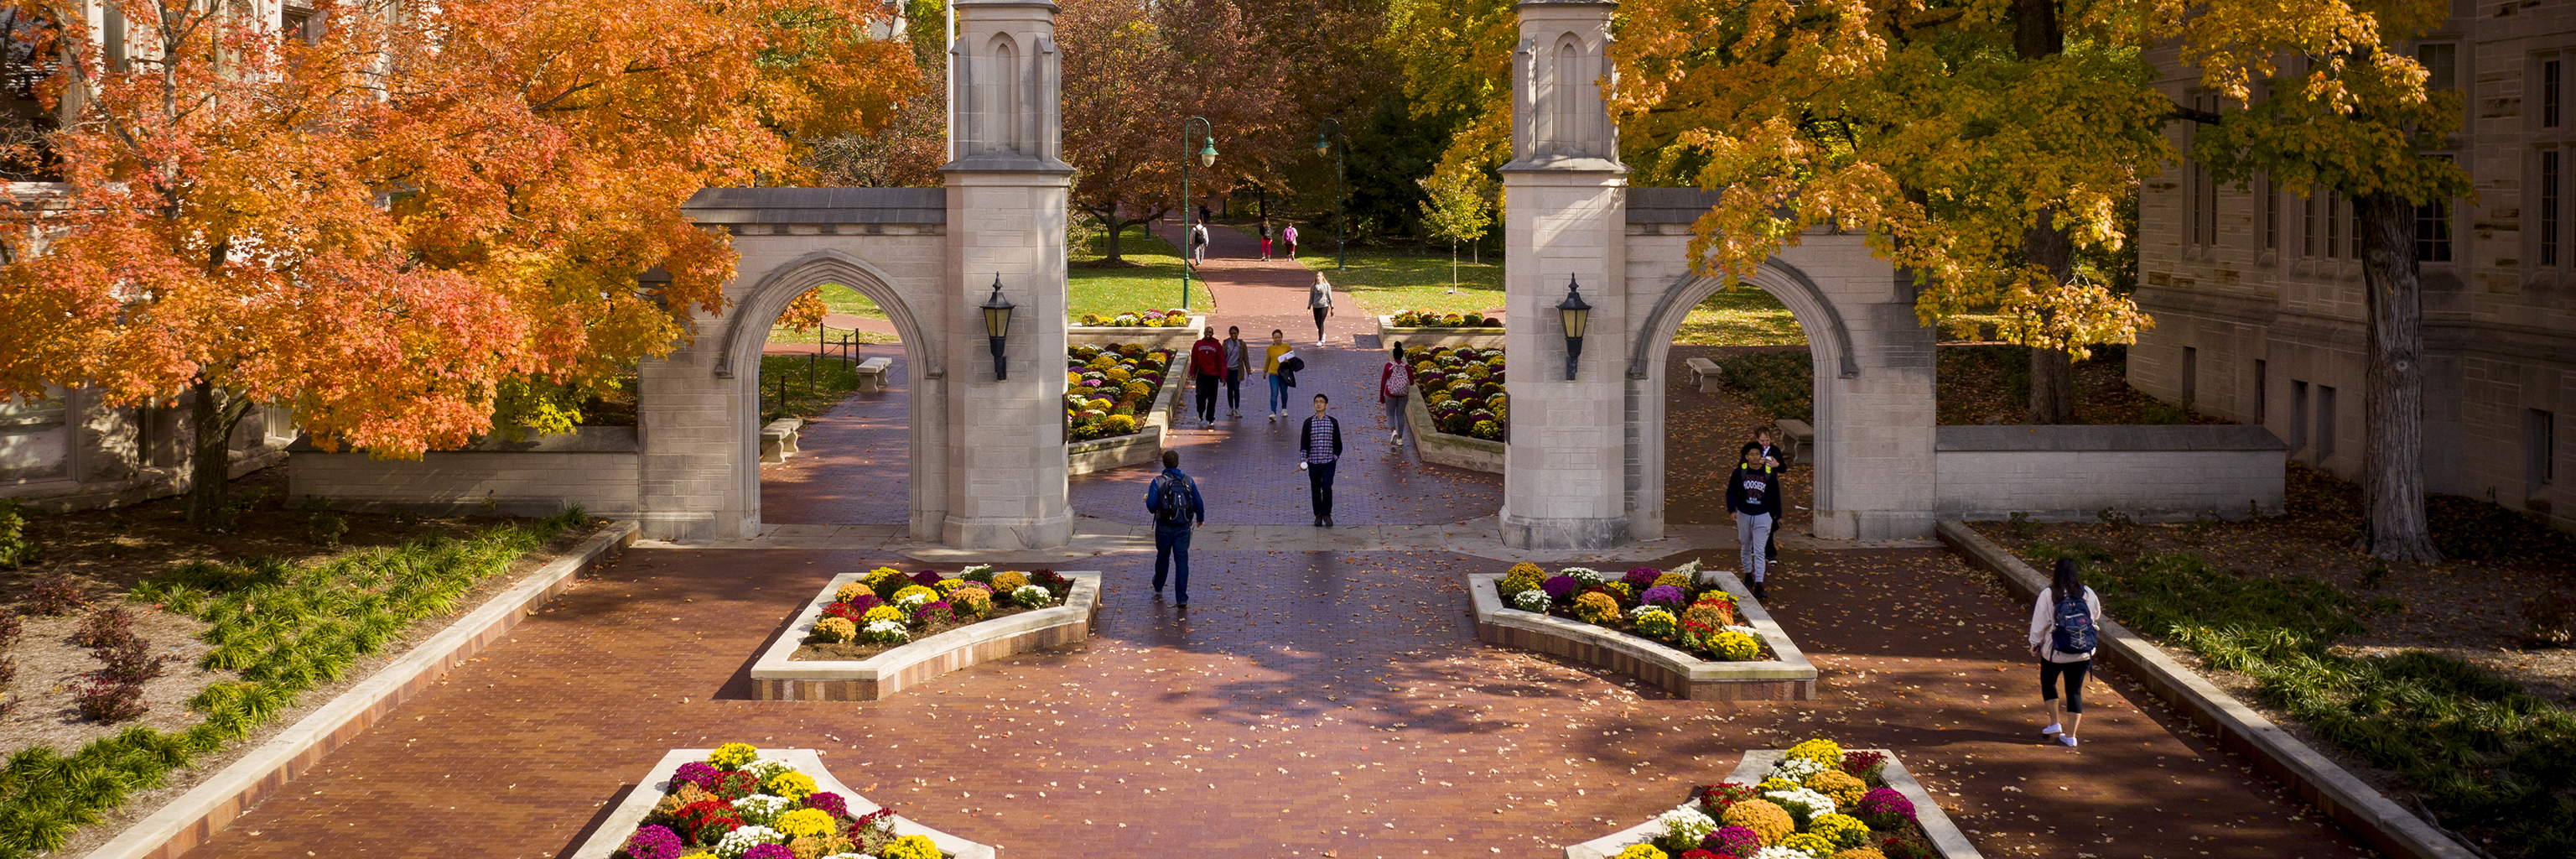 Students walk through the Indiana University Bloomington campus on a scenic fall day.